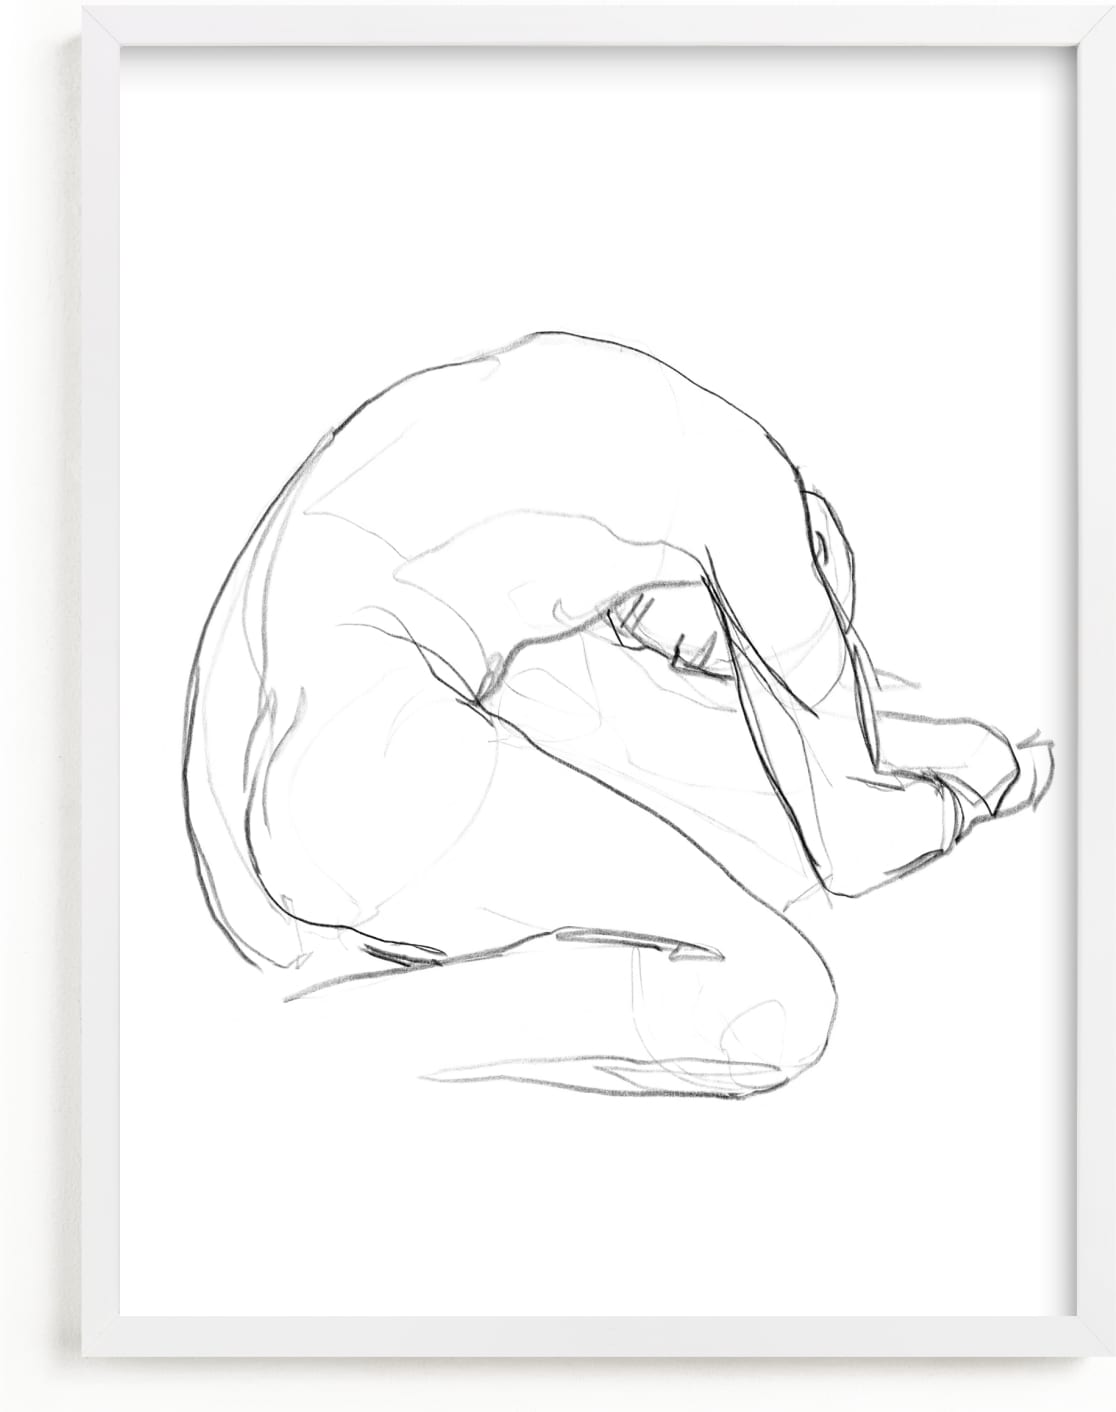 This is a black and white art by Lorent and Leif called Seated Figure.